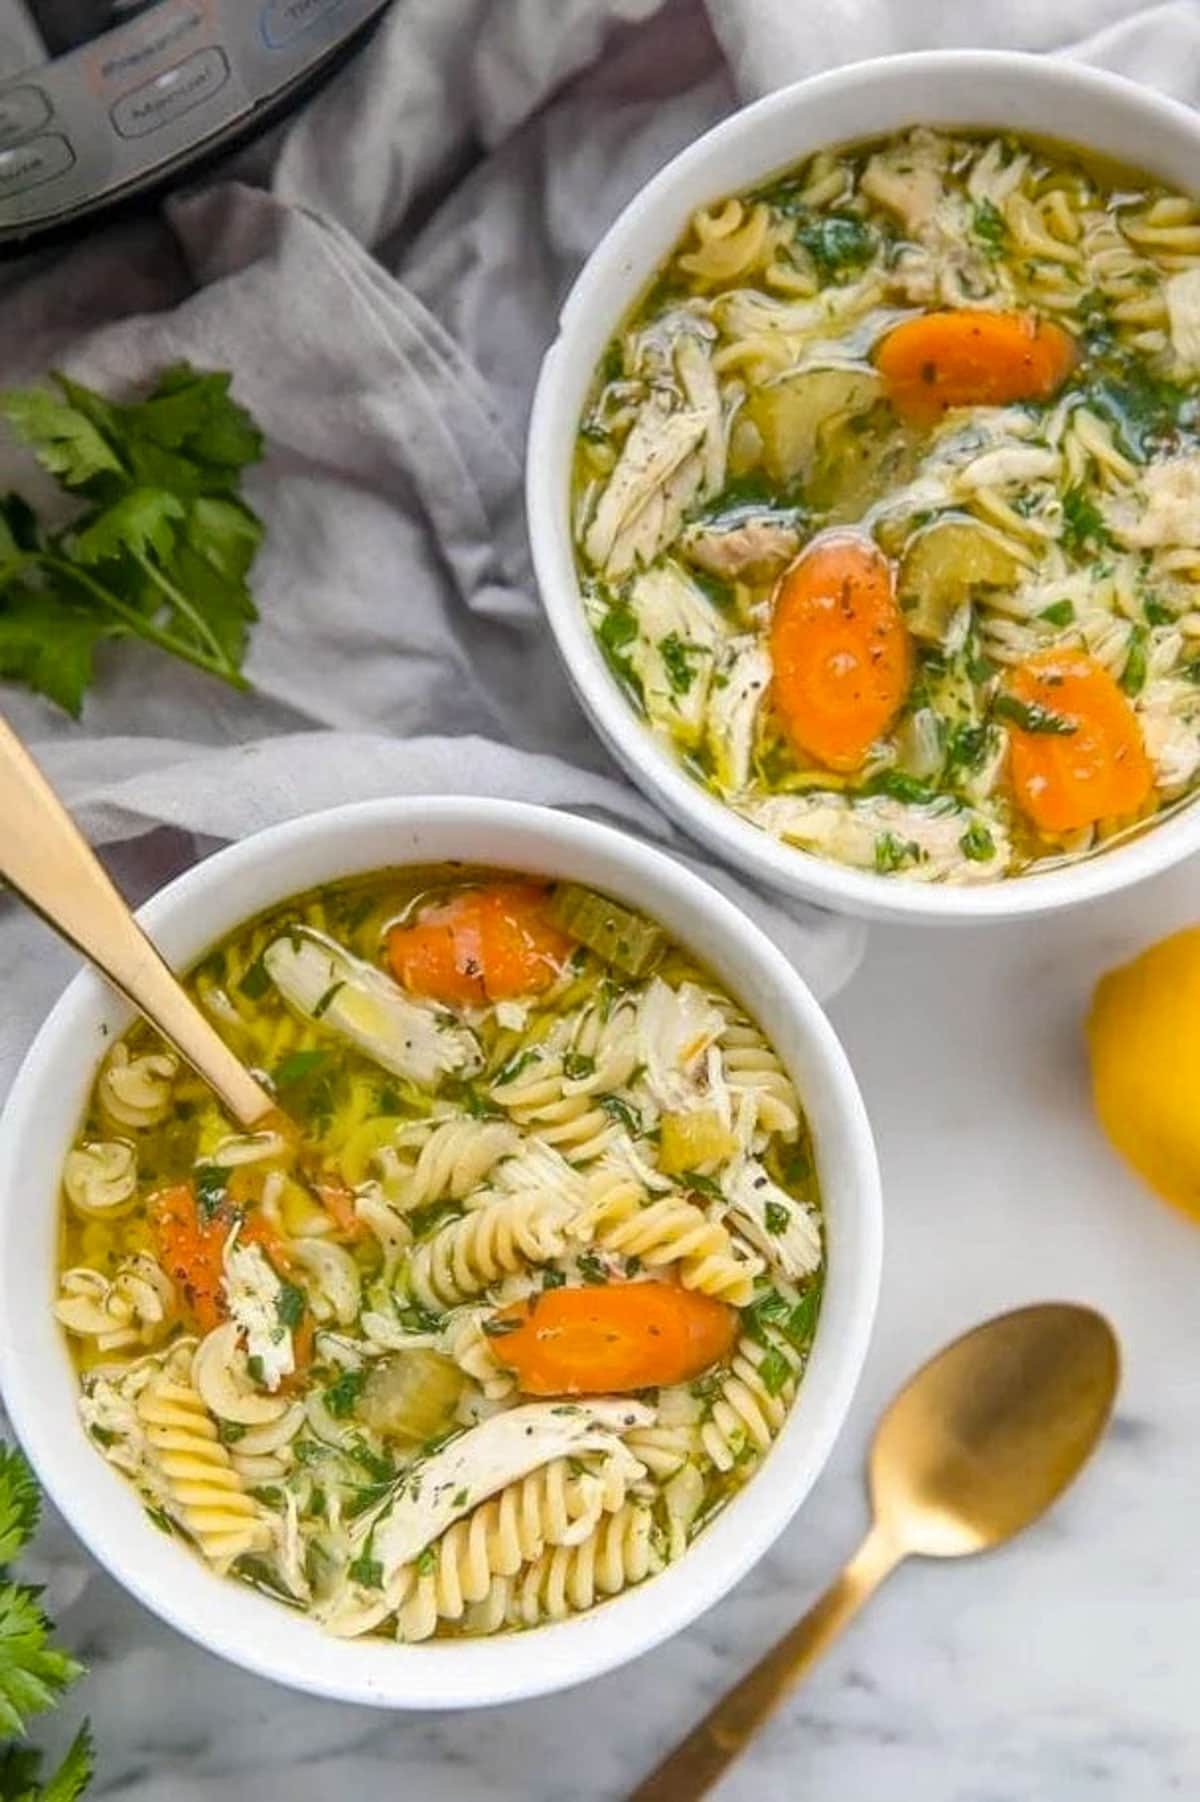 Two white soup bowls holding Instant Pot chicken noodle soup with carrots and rotini.